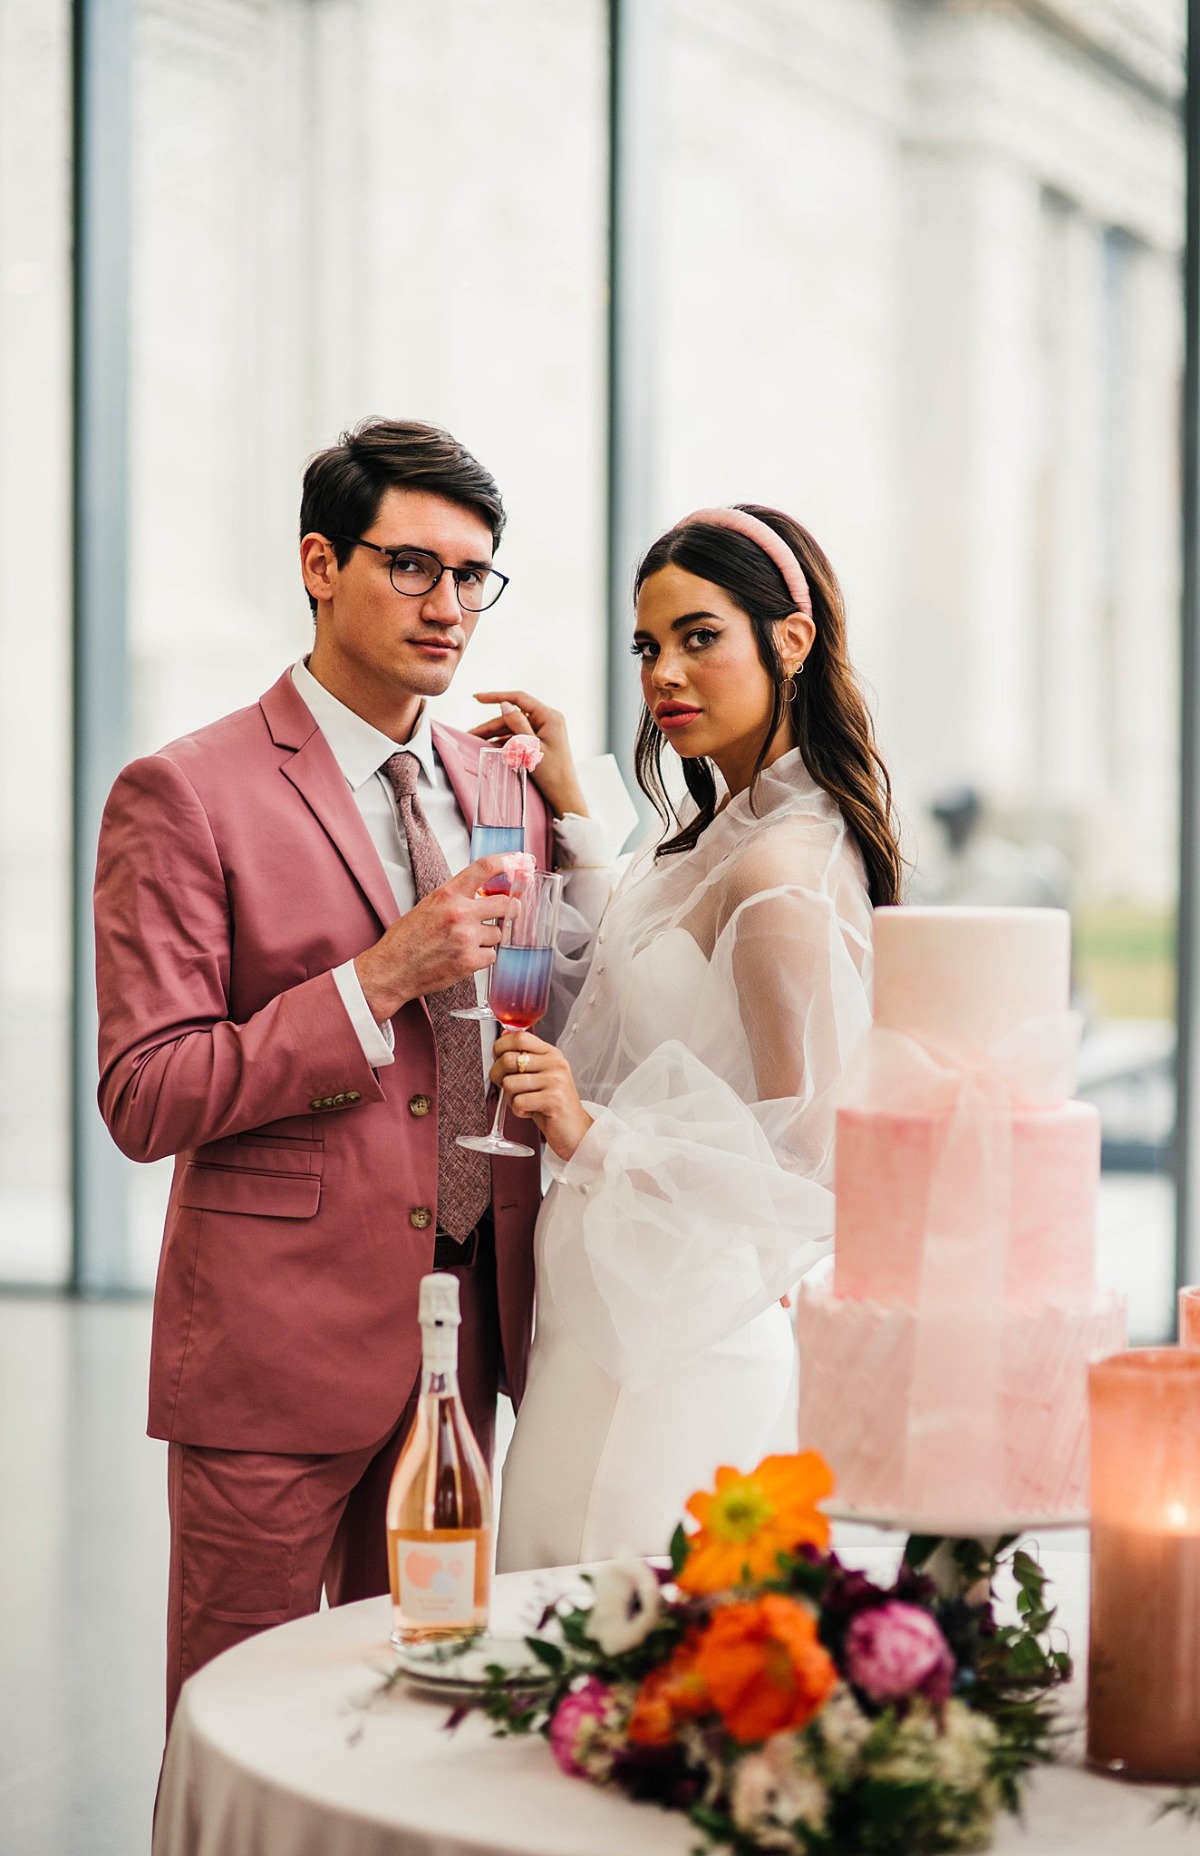 retro wedding inspiration photographed by Love Hunters